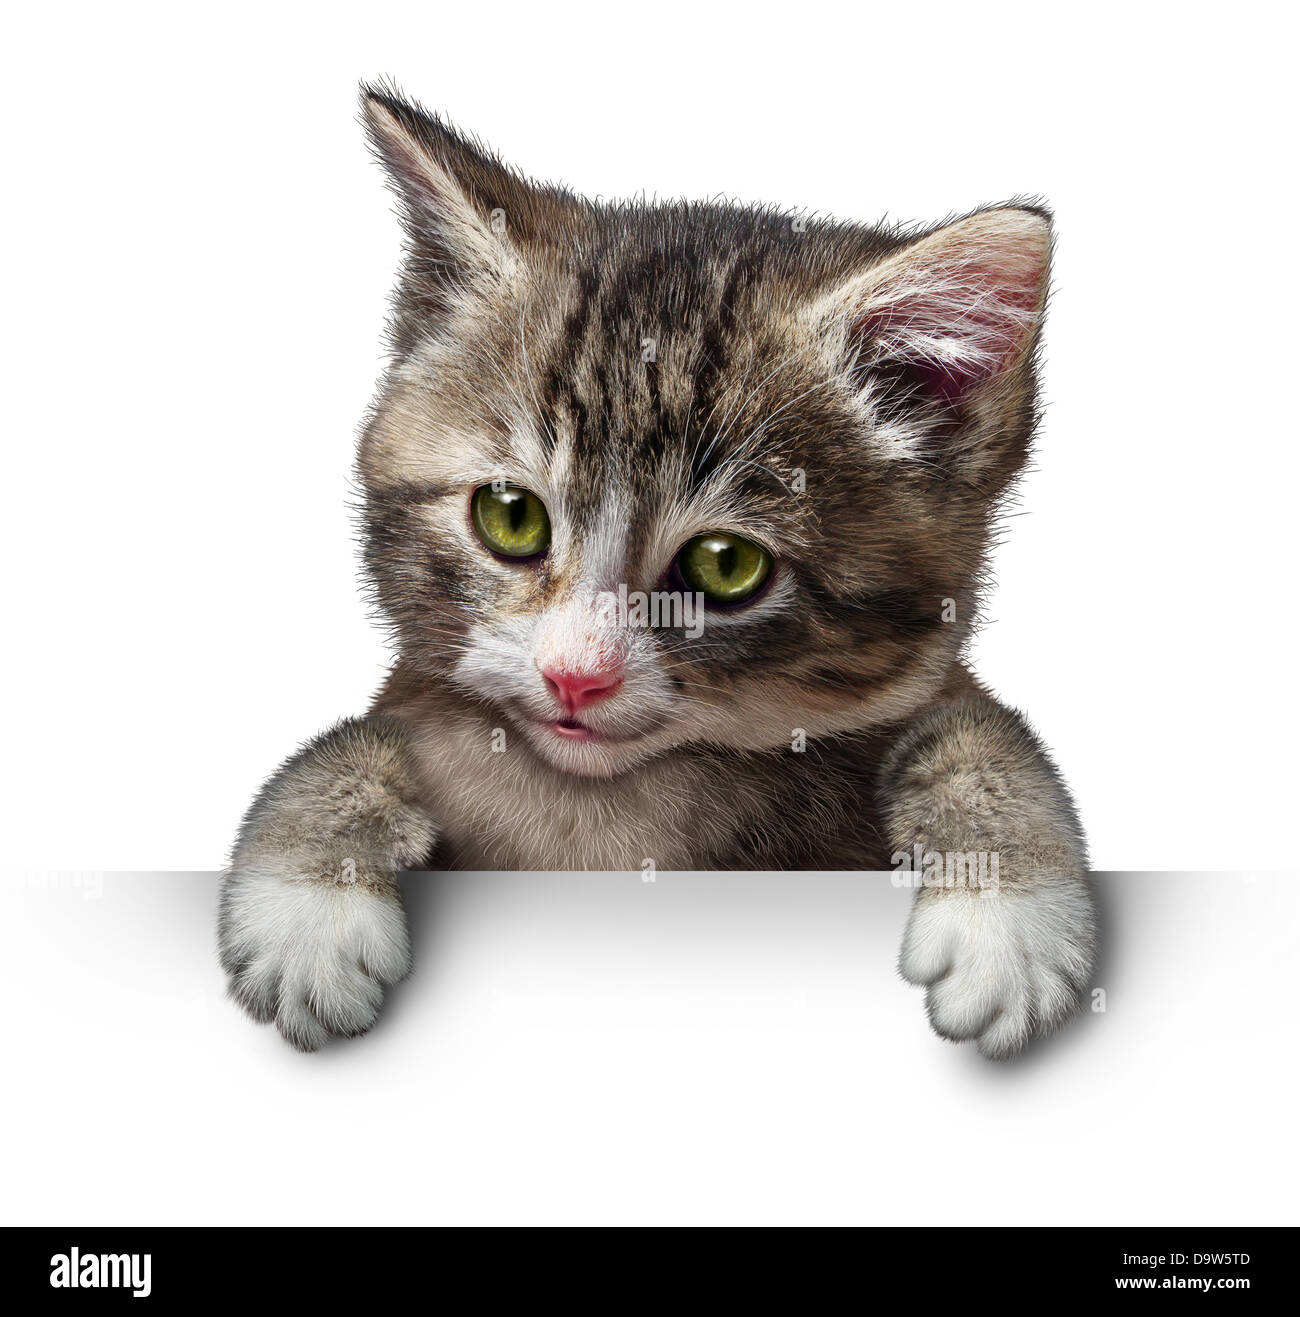 Cat or kitten holding a horizontal blank card sign as a cute feline with a smiling happy expression supporting and communicating a message pertaining to pet care on white. Stock Photo